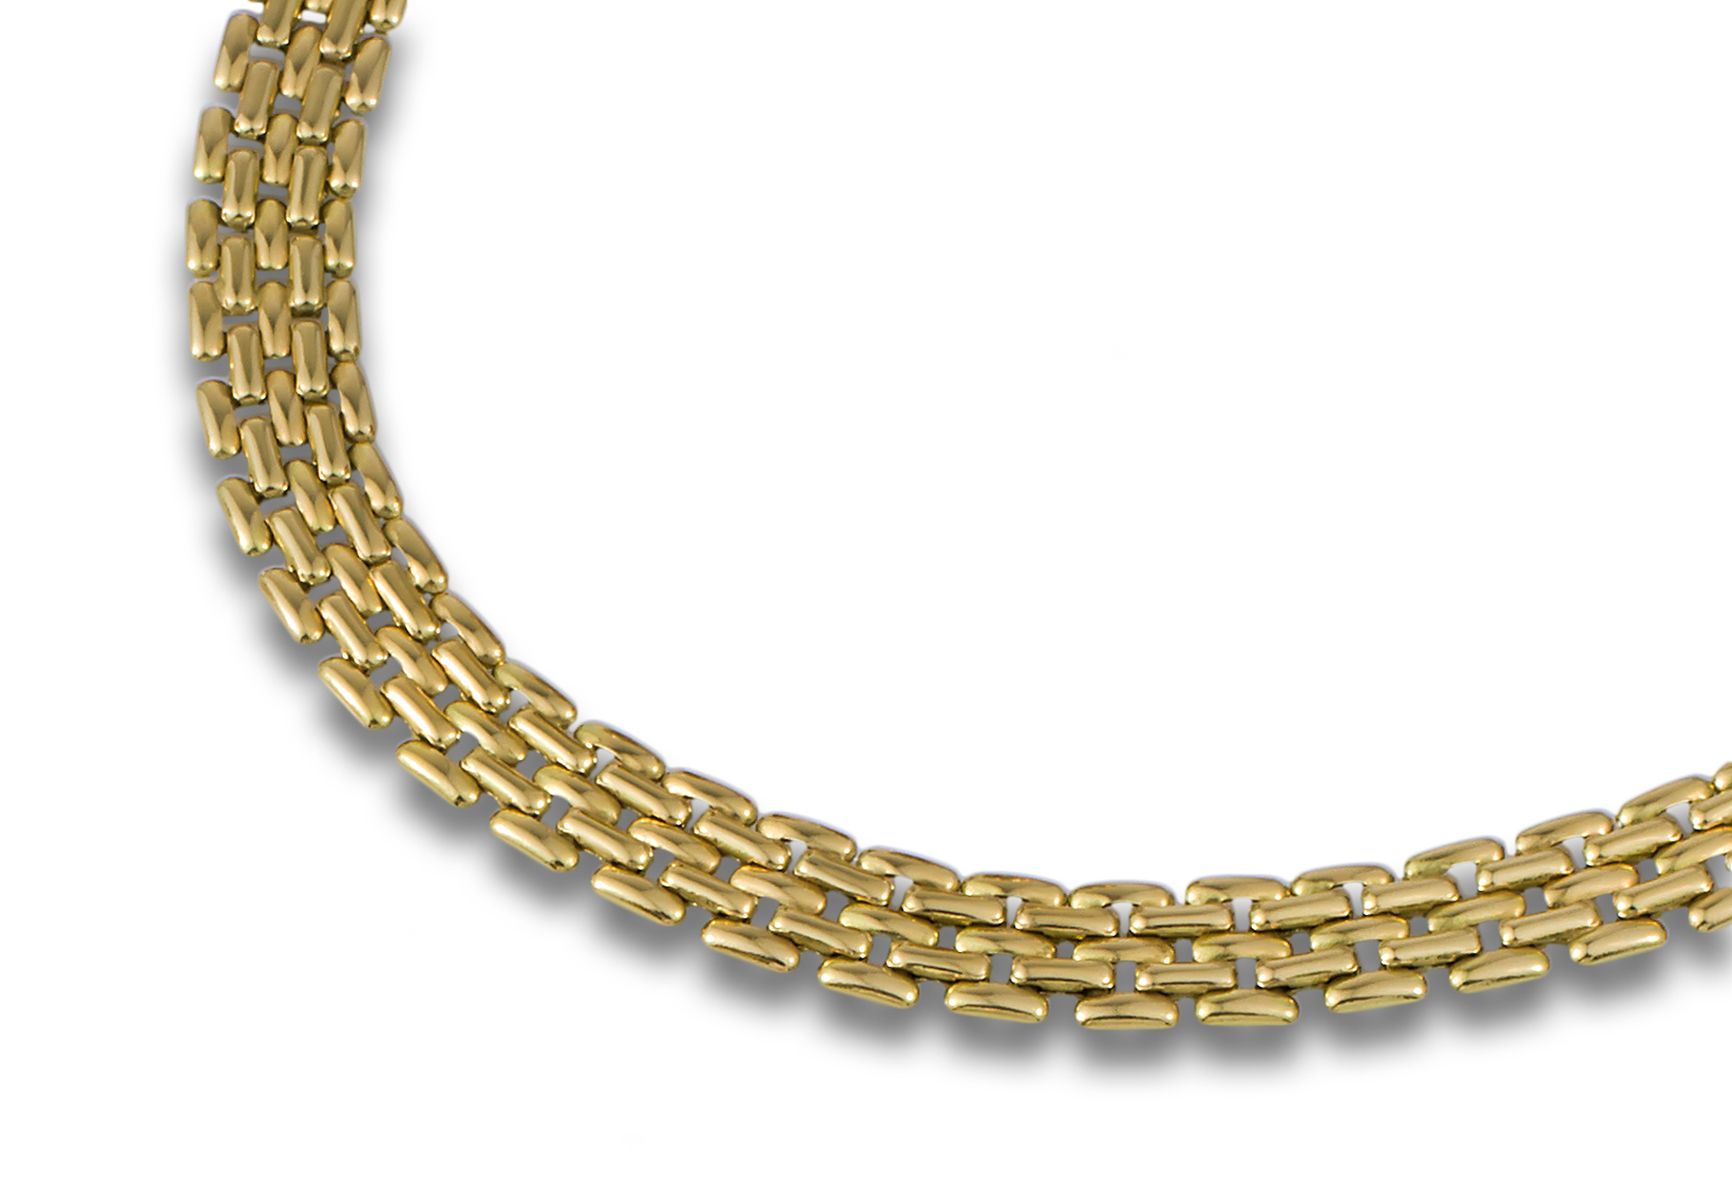 GOLD PANTHERE TYPE CHOKER Collier panthère en or jaune 18kt. Poids : 40.85 gr. .